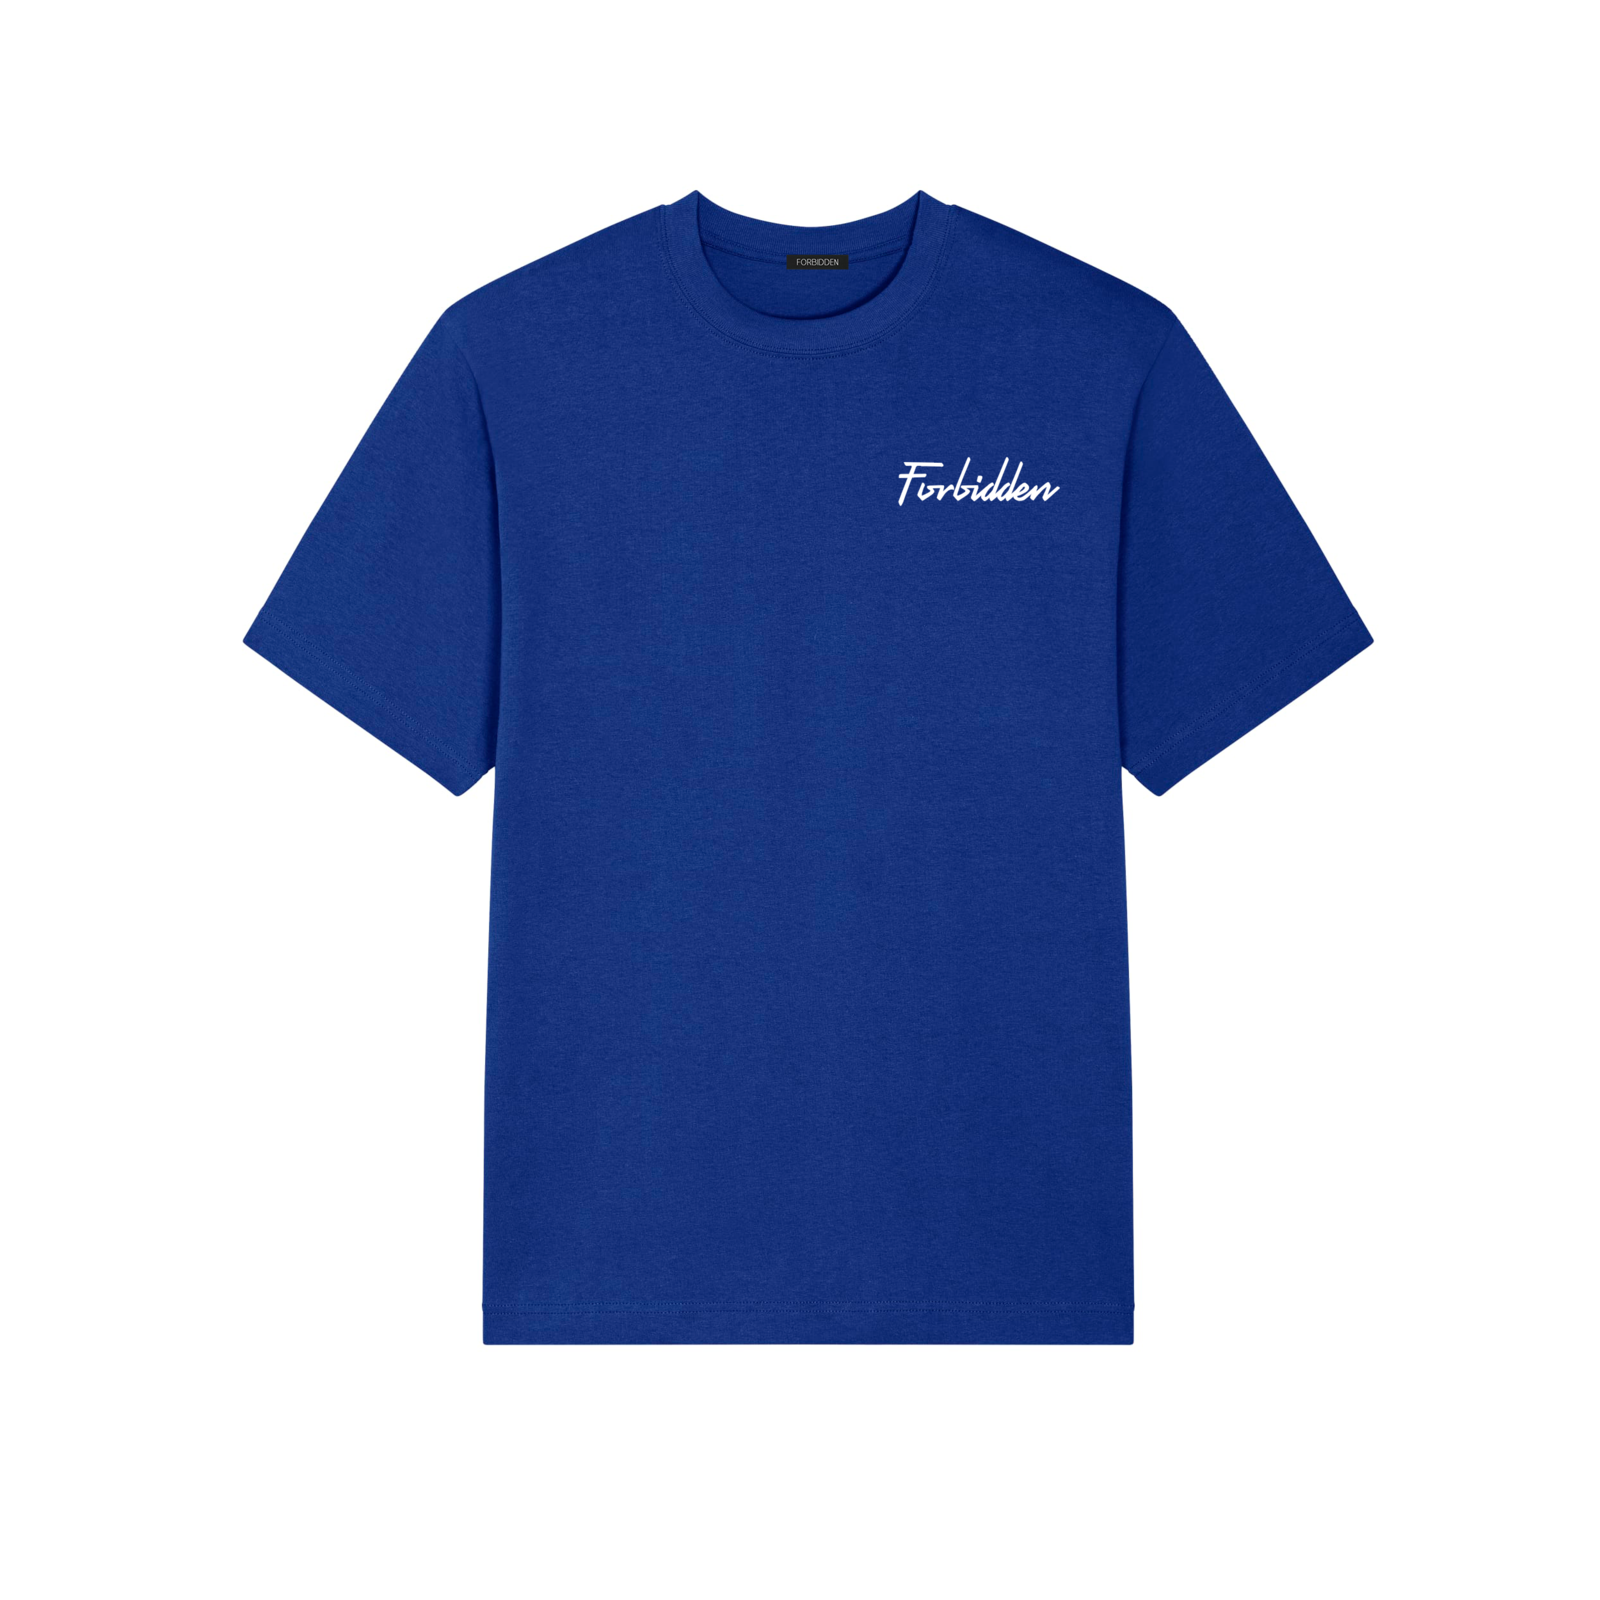 T-shirt determined dreamers - Blue